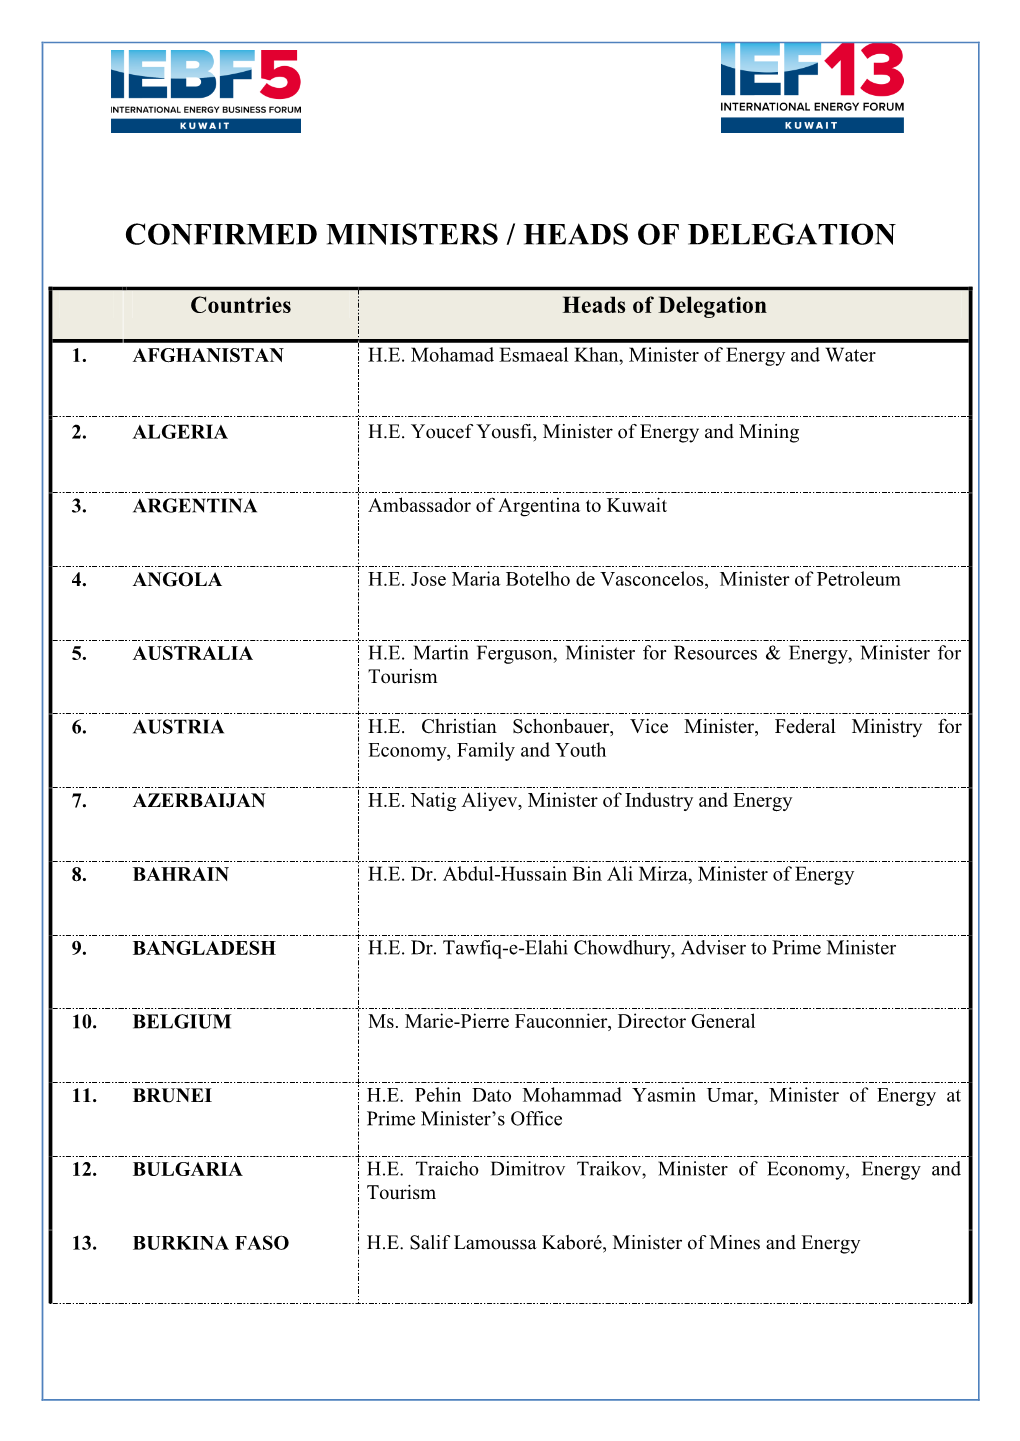 Ministers and Heads of Delegation